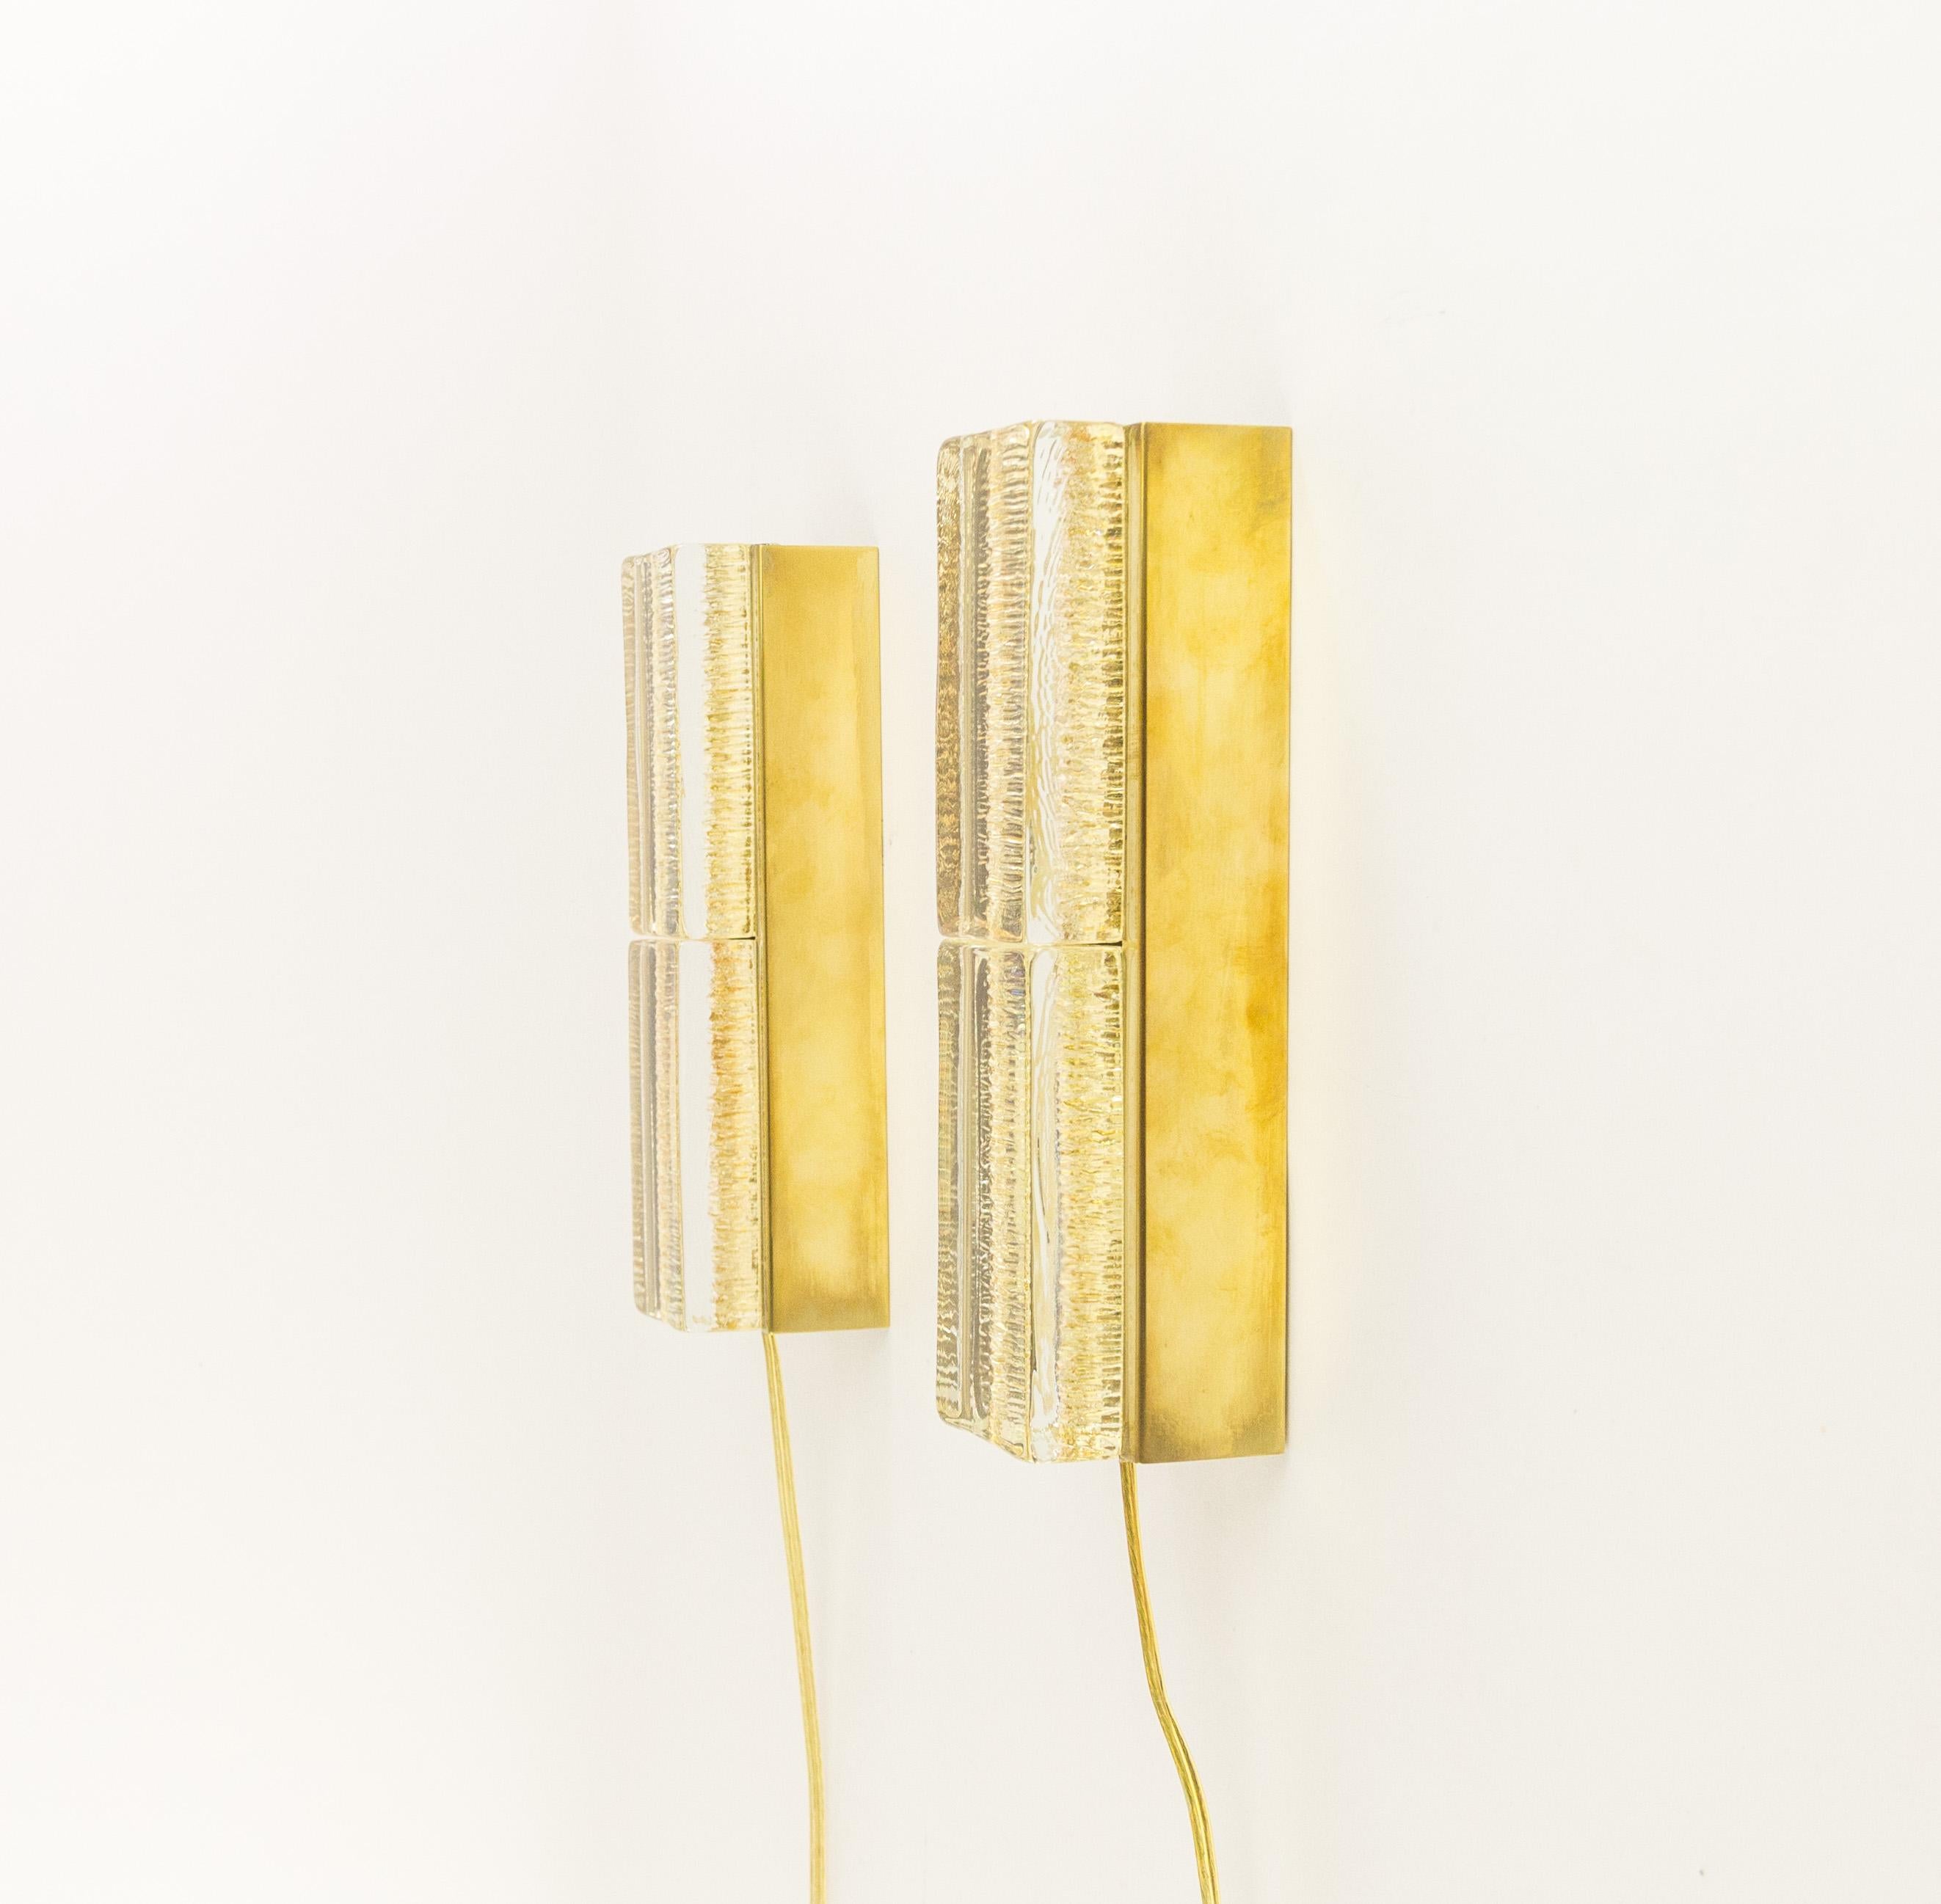 A set of two double Atlantic wall lamps that are produced by Danish lighting manufacturer Vitrika in the 1970s. Both lamps consists of, two solid handmade glass bodies in gold, and the brass holder.

The condition of the brass parts is very good.